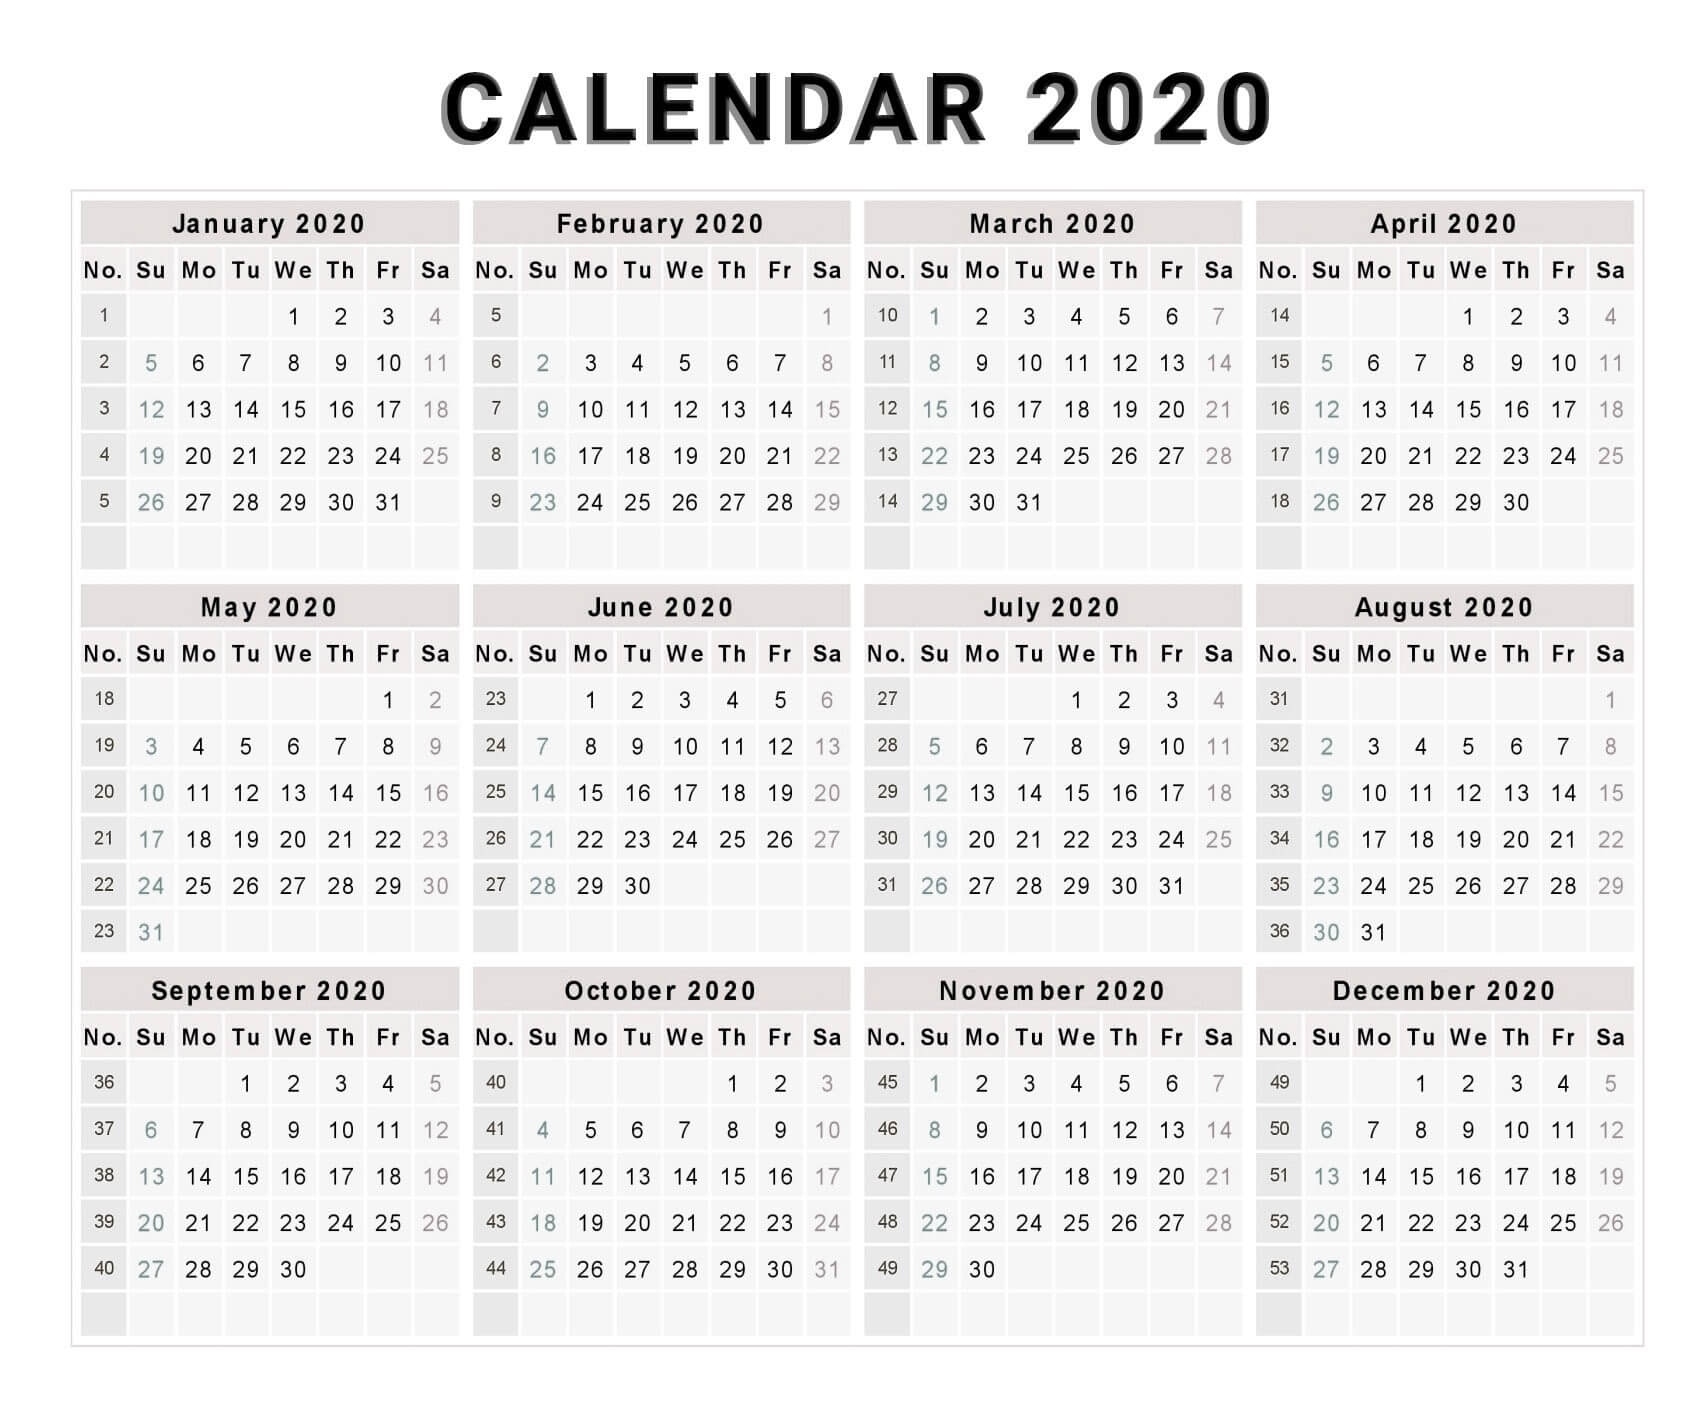 Yearly Calendar With Notes 2020 Pdf - 2019 Calendars For Perky 2020 Calendar South Africa Pdf